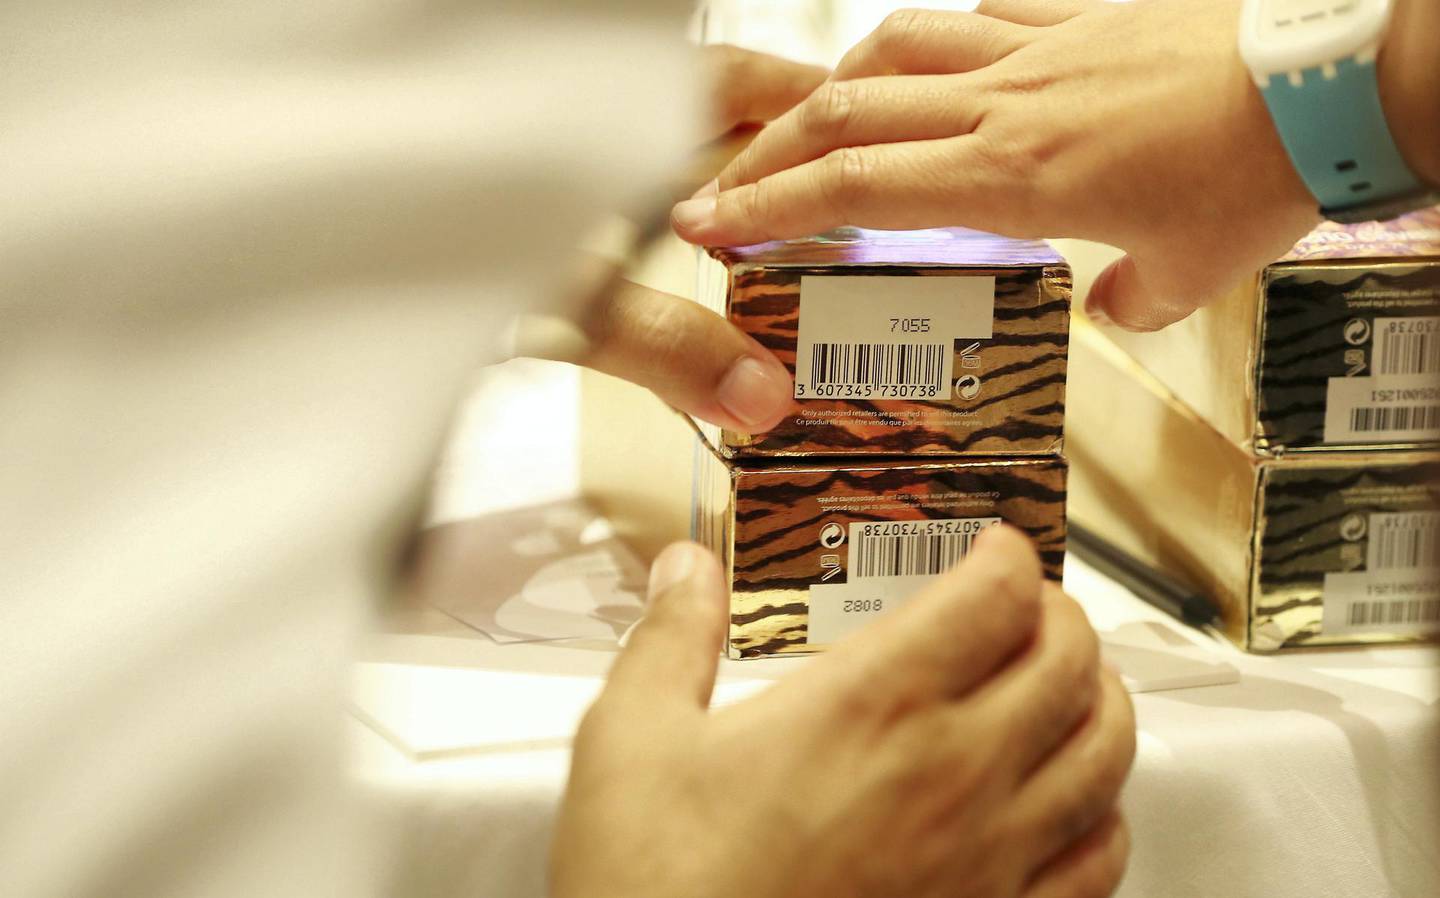 ABU DHABI, UNITED ARAB EMIRATES , Dec 10 – 2019 :- Member of the Abu Dhabi Police looking at the real and counterfeit cosmetic items during the Intellectual Property and Brand Protection Training held at The Abu Dhabi EDITION hotel at Al Bateen Marina in Abu Dhabi ( Pawan Singh / The National )  For News. Story by Kelly Clarke 